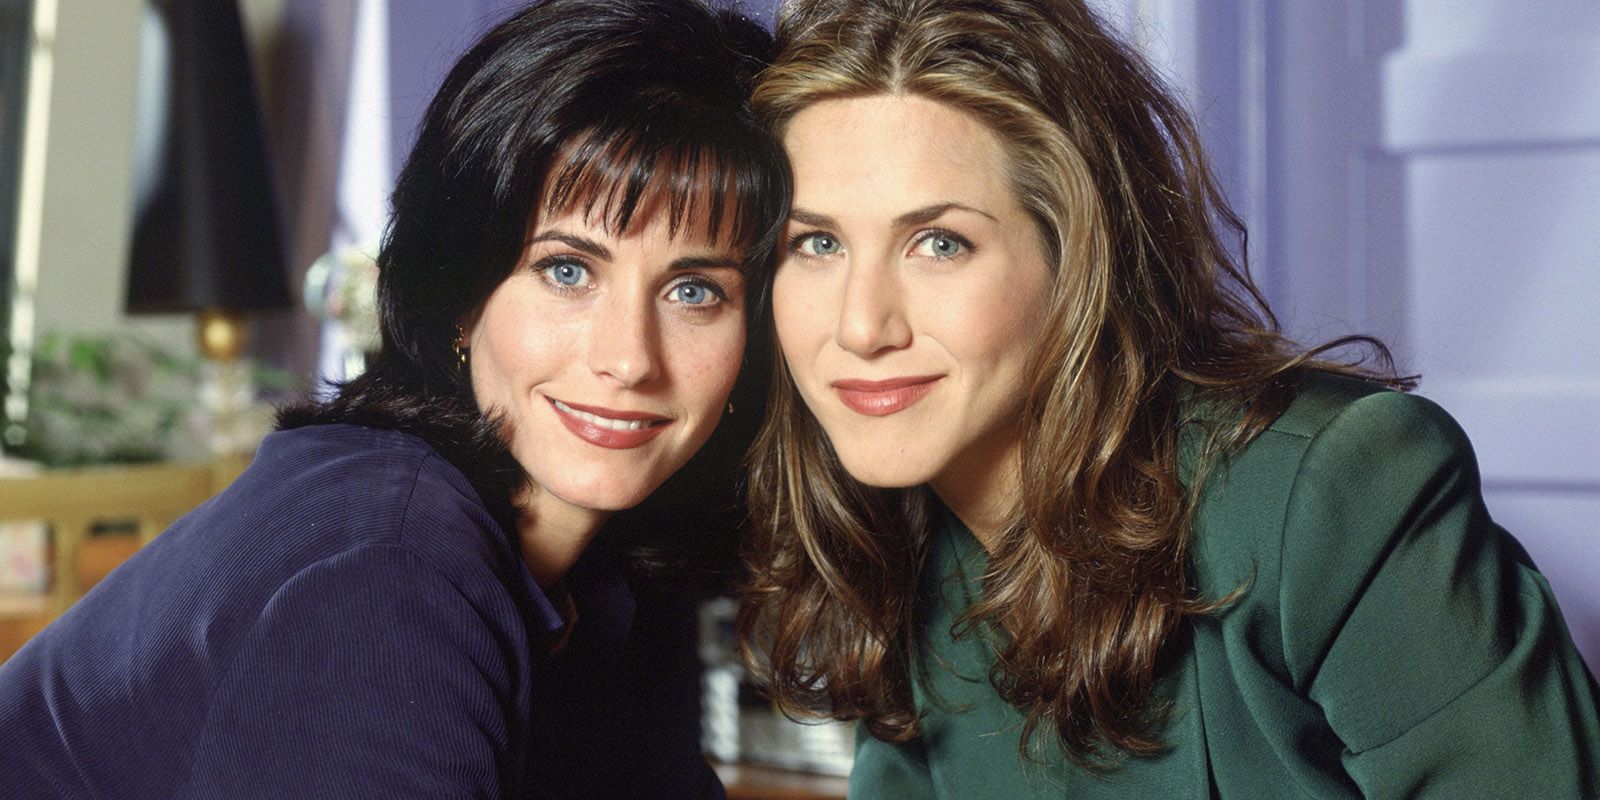 Monica and Rachel posing for a photo in Friends.